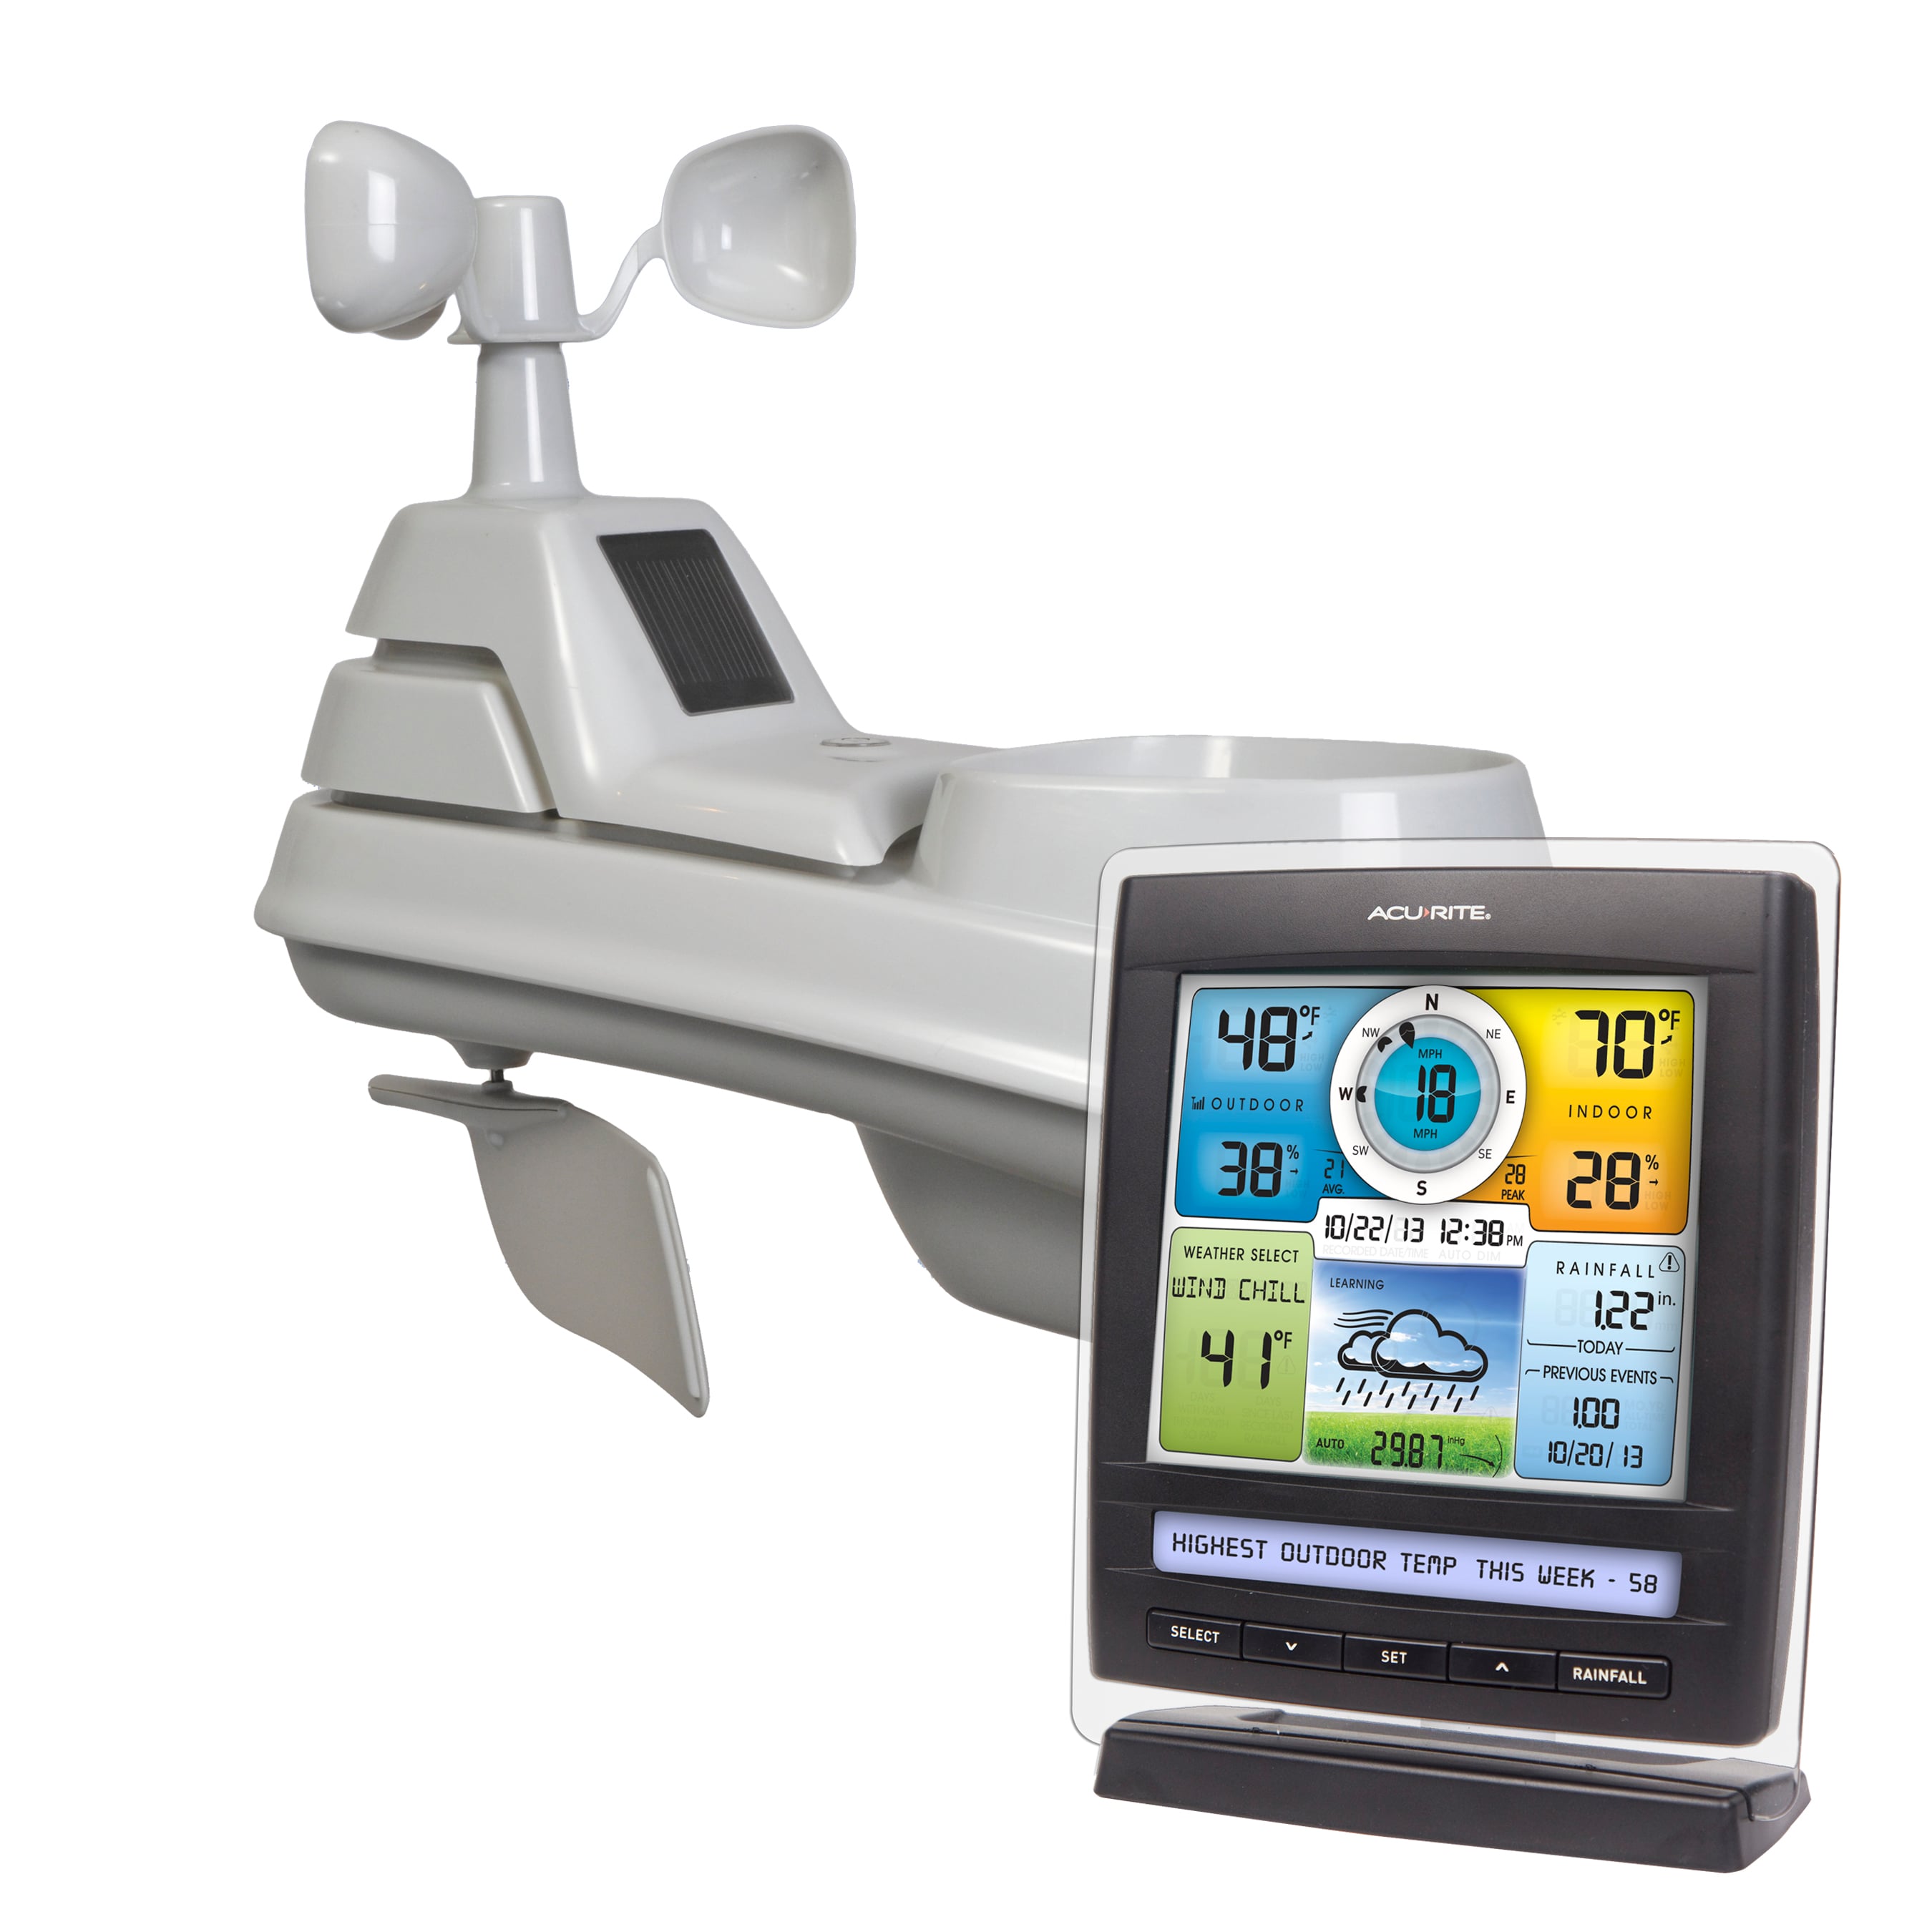 AcuRite Iris (5-in-1) Weather Station with Color Display and Weather Ticker